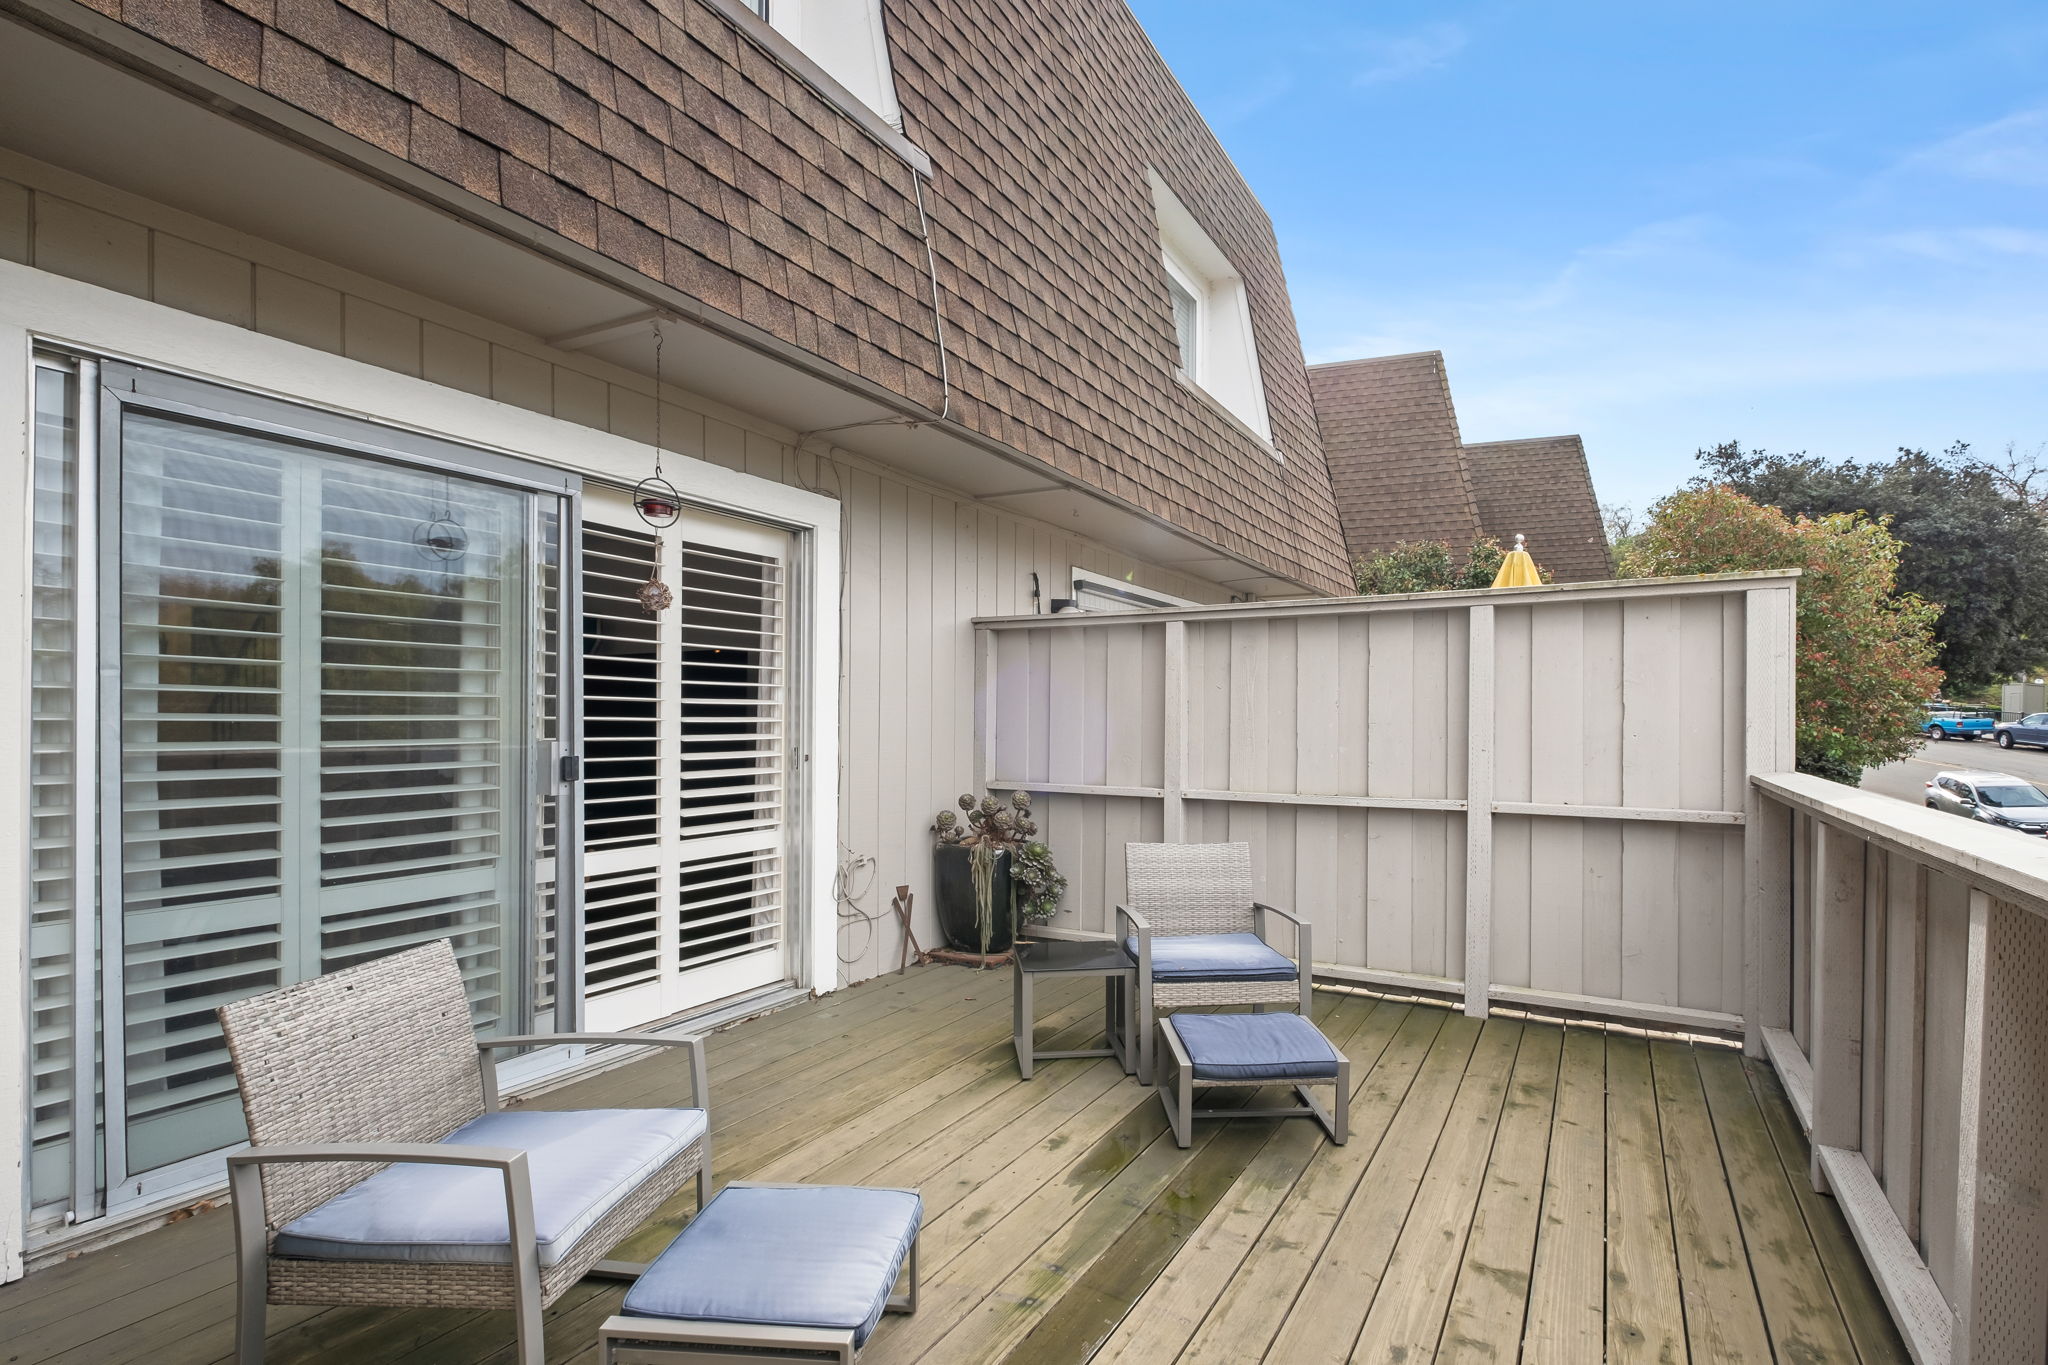 Relax or Entertain on your spacious Deck with Gorgeous Views!